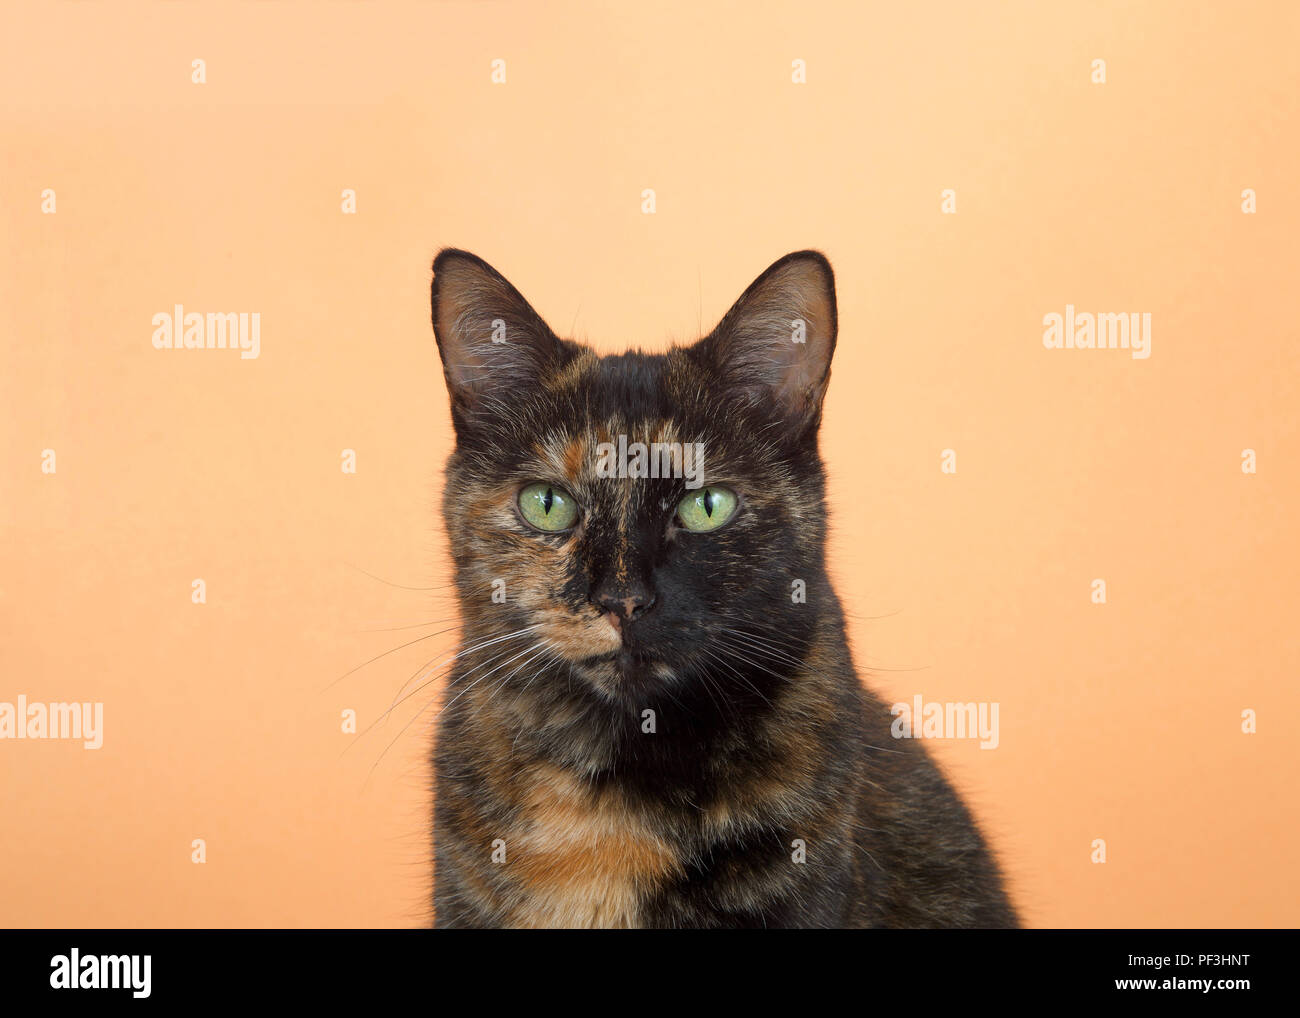 Portrait of one tortie torbie tabby cat on an orange background. Looking directly at viewer with surprised expression. Copy space. Stock Photo